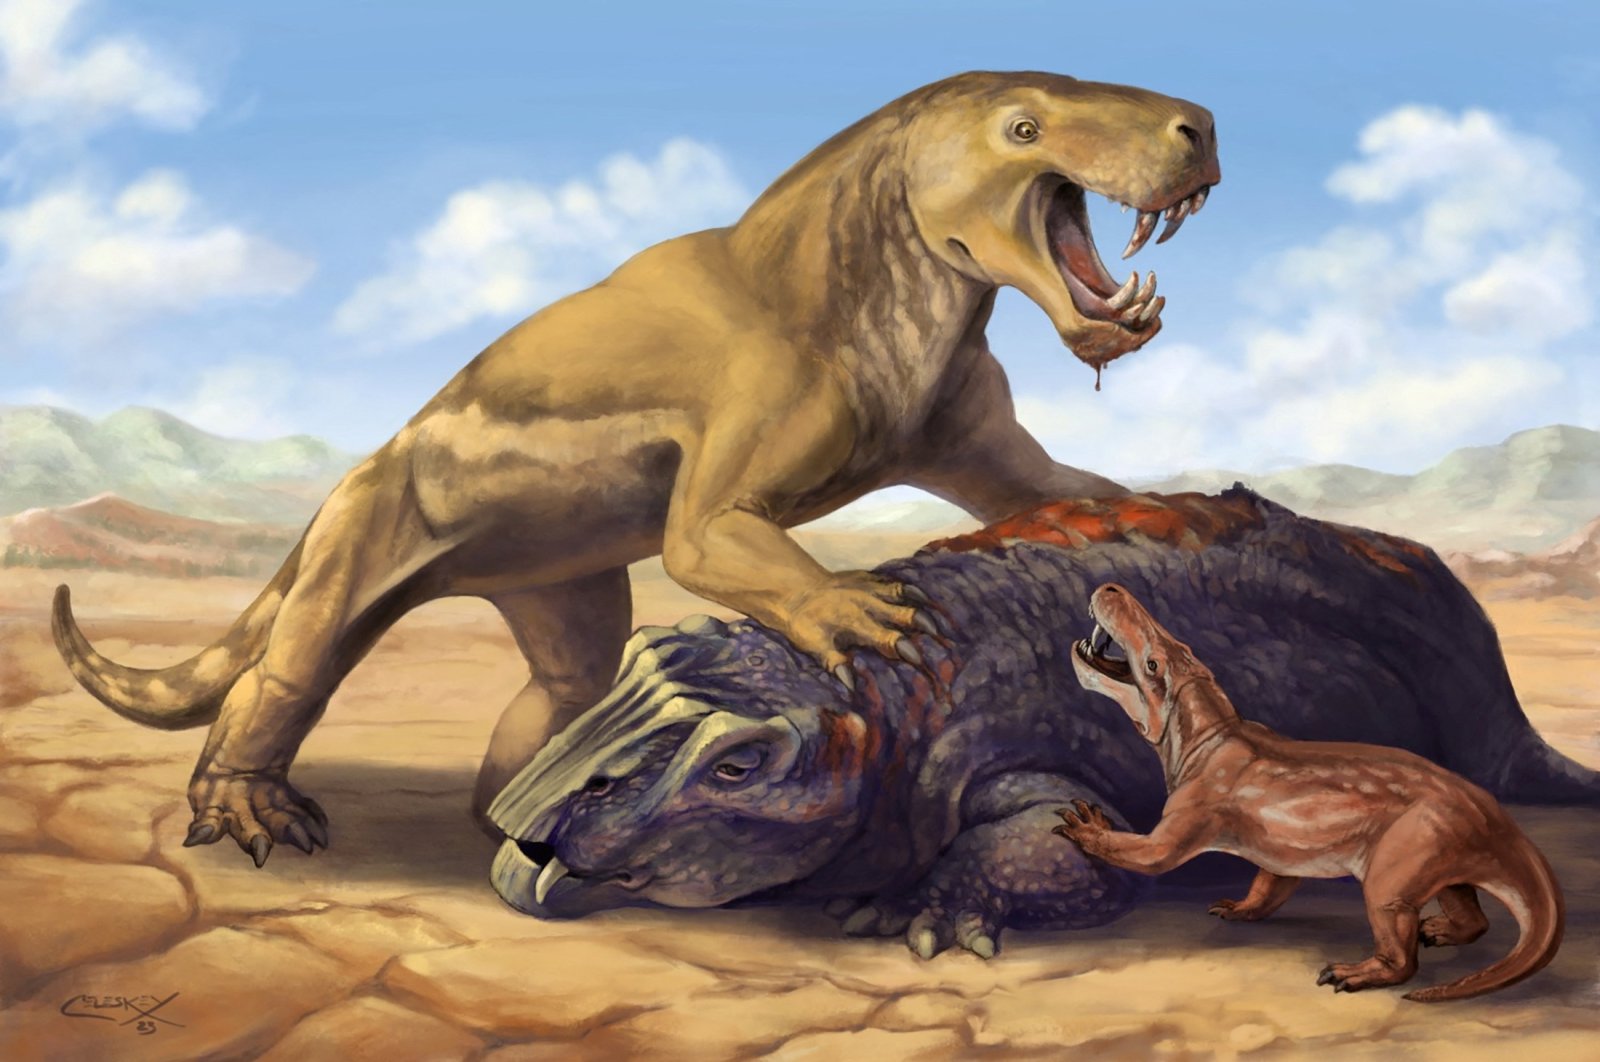 An illustration shows the Permian period tiger-sized saber-toothed protomammal Inostrancevia atop its dicynodont prey, scaring off the much smaller species Cyonosaurus. (Reuters Photo)